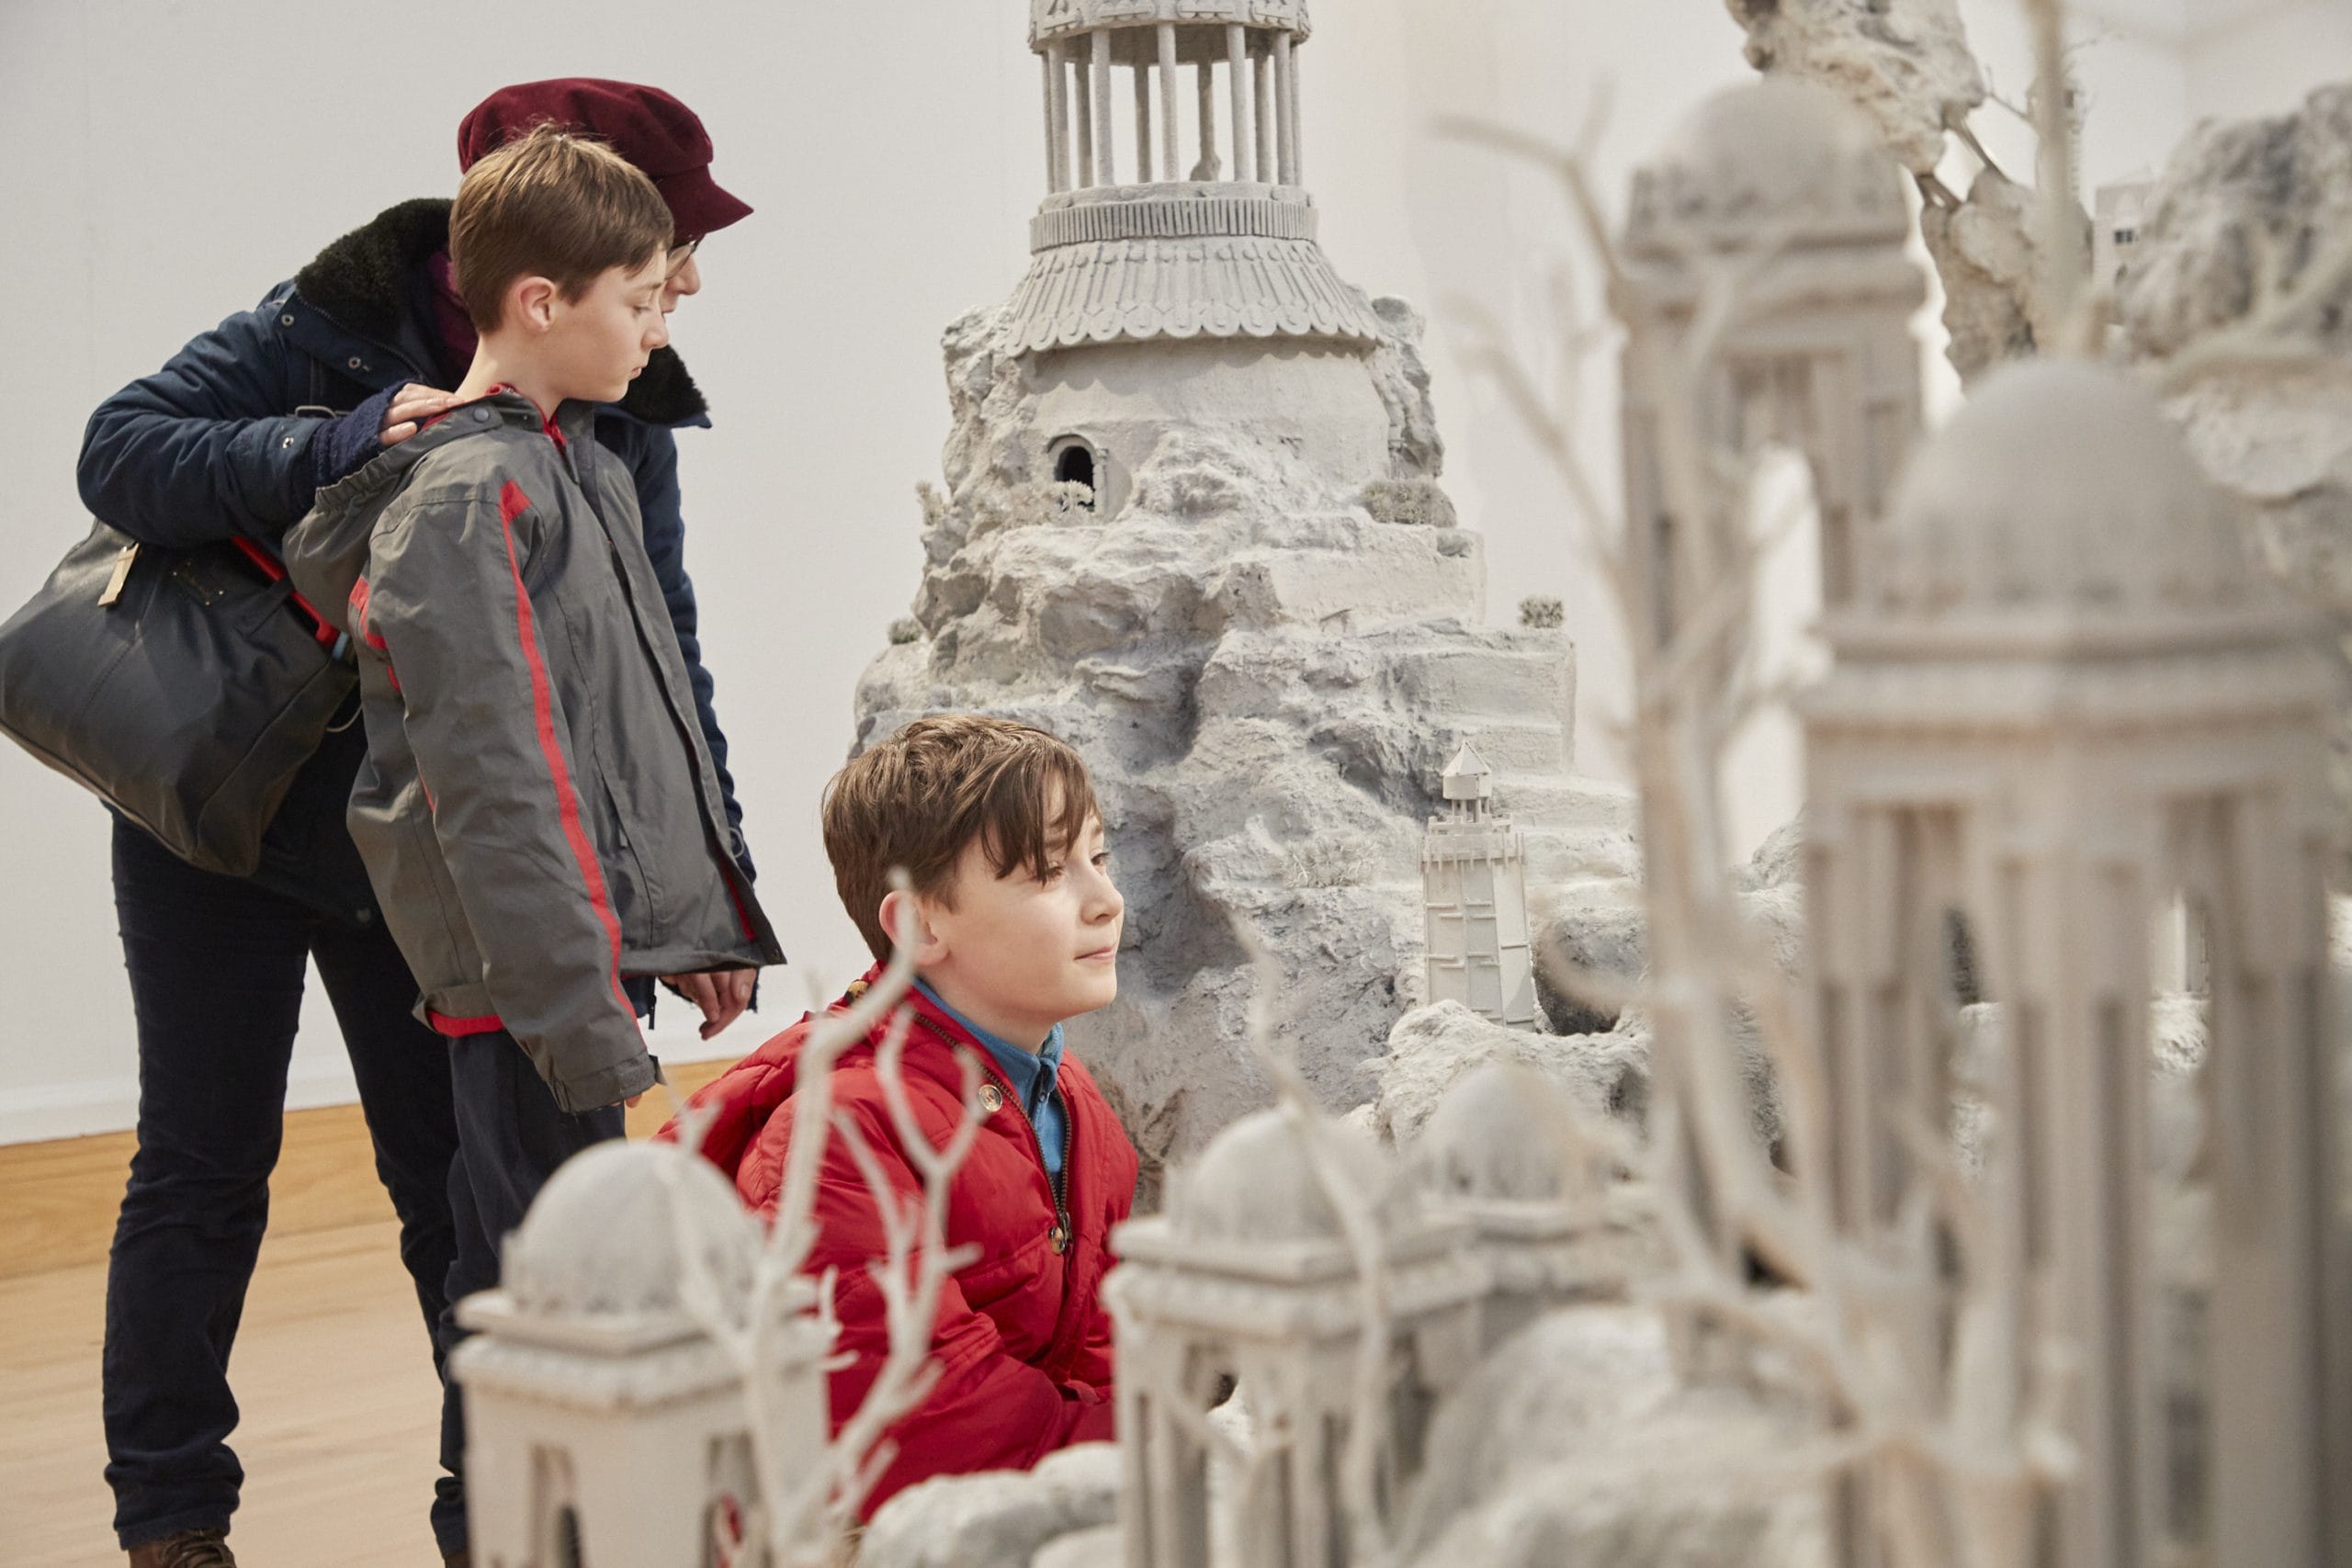 A child looks at a white sculpture of tiny houses